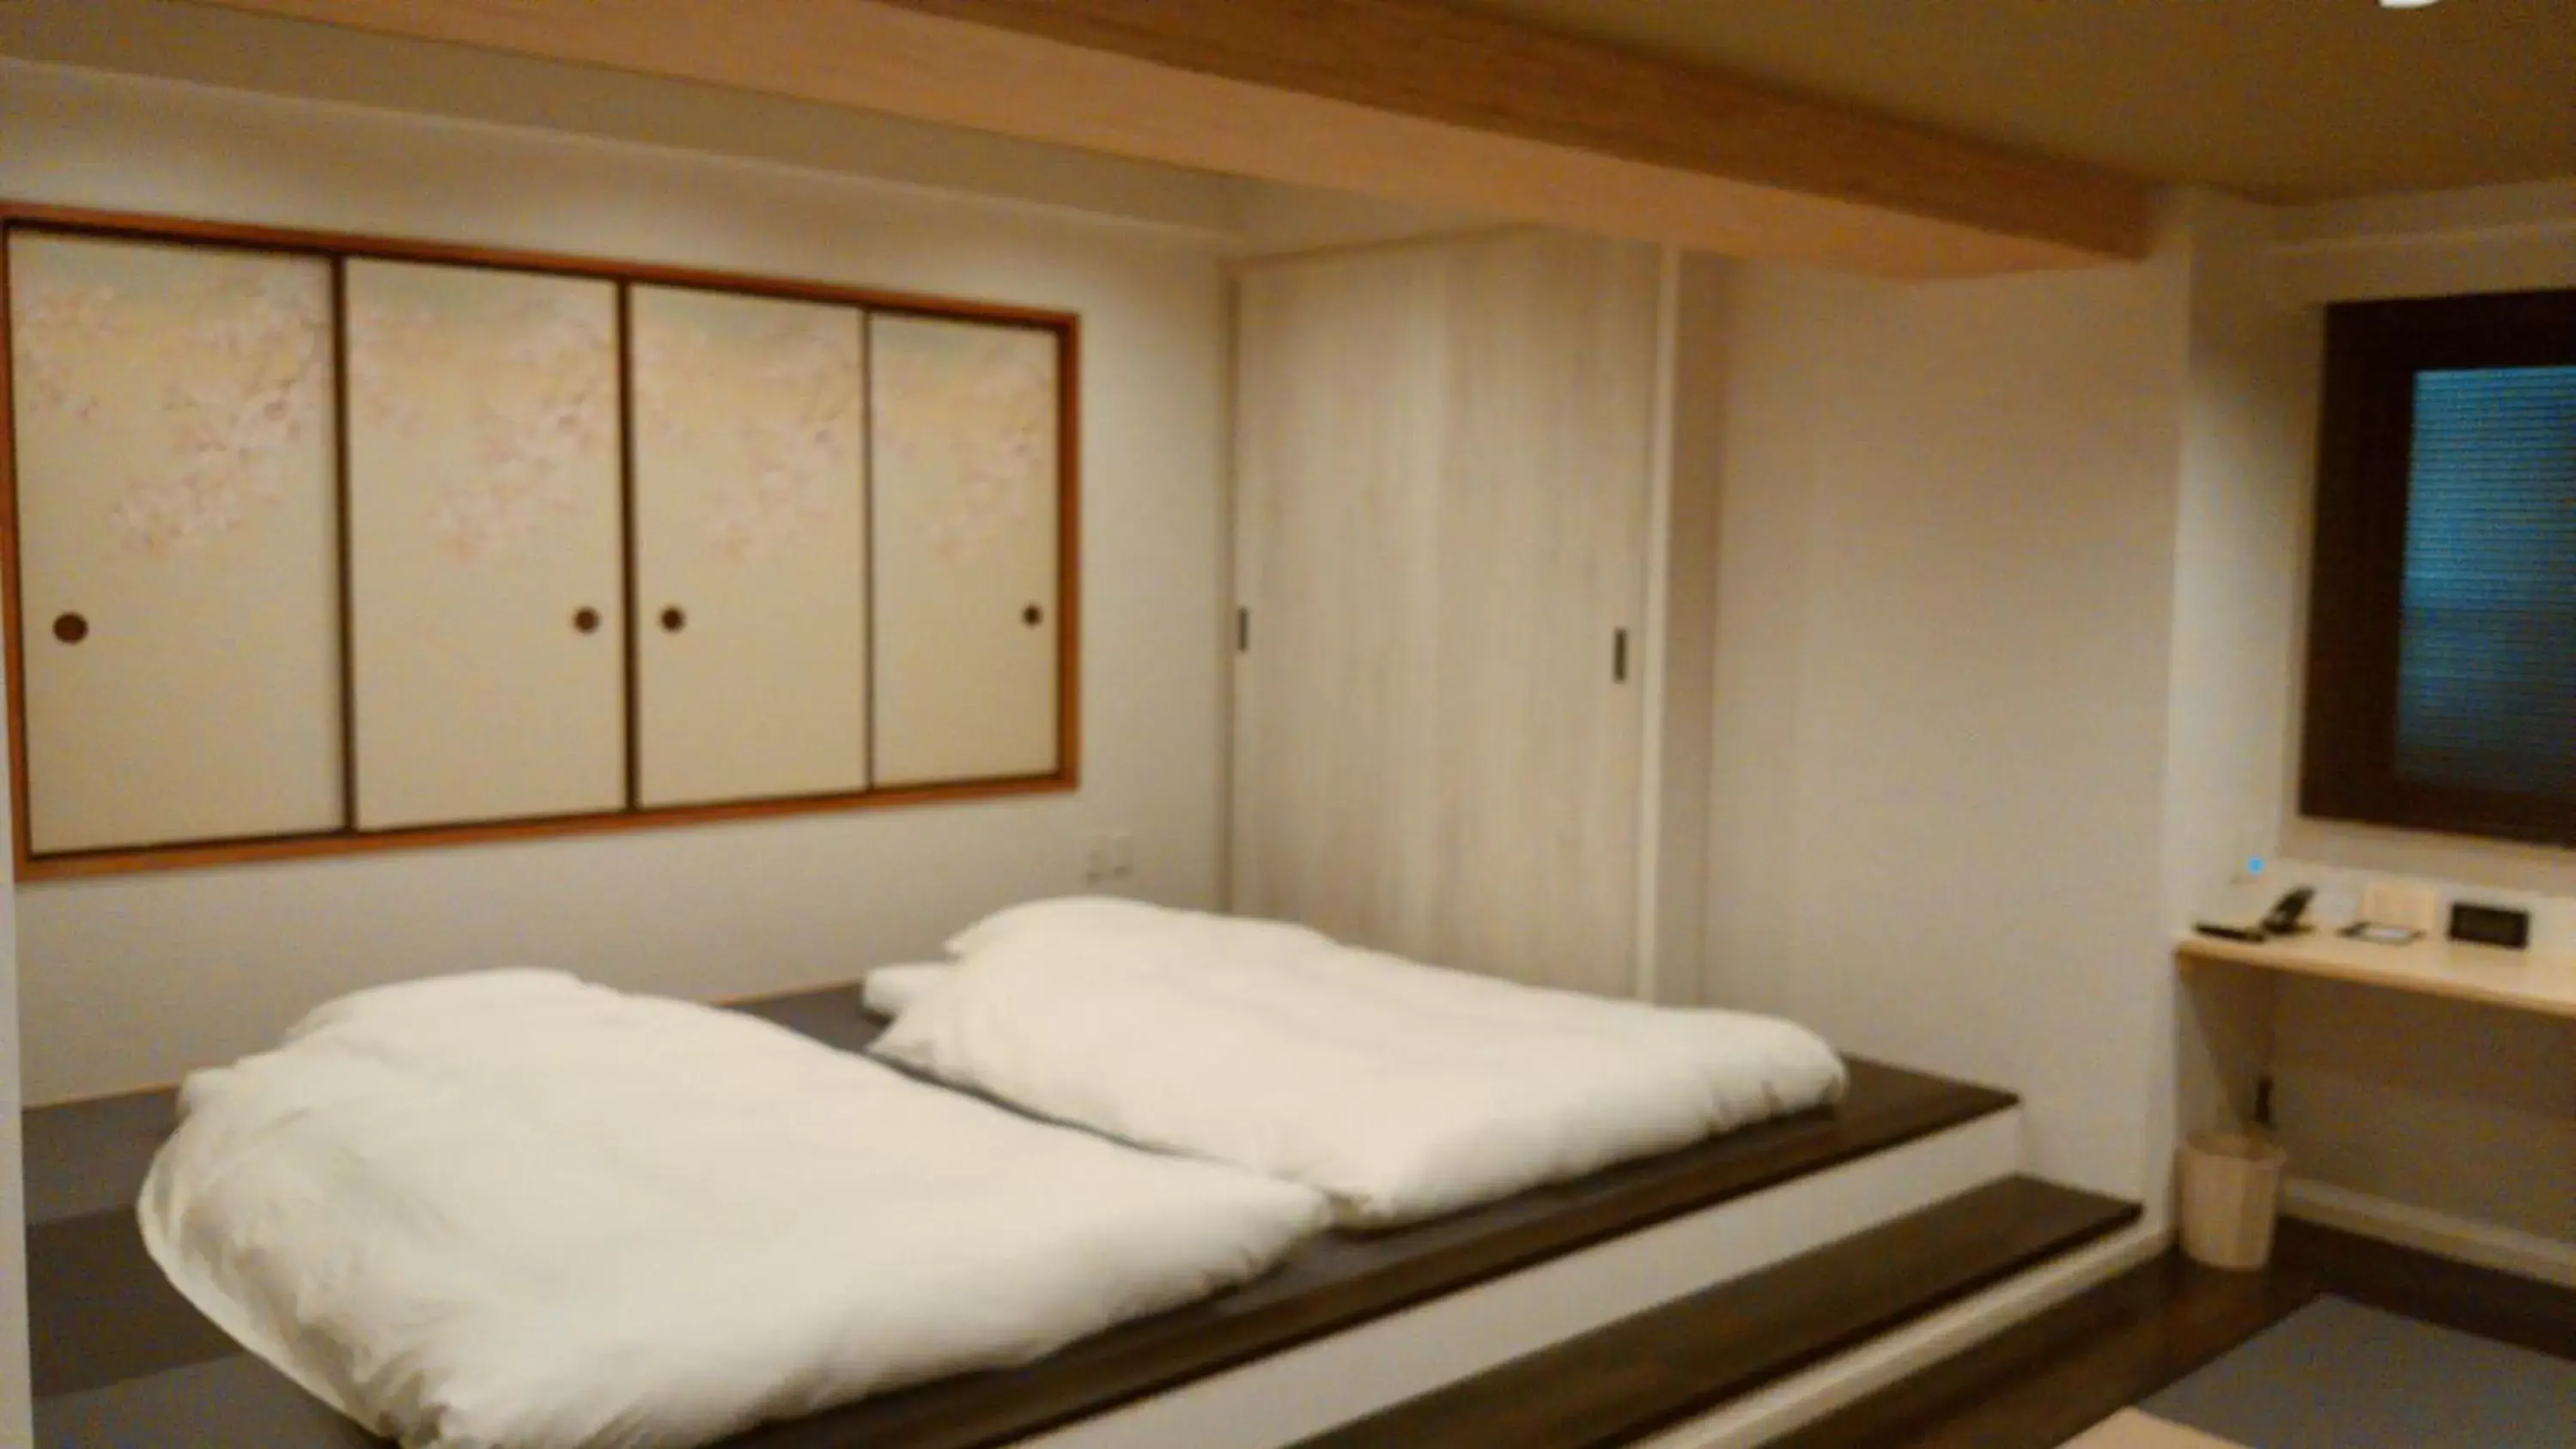 Bed, Room Photo in Ueno First City Hotel